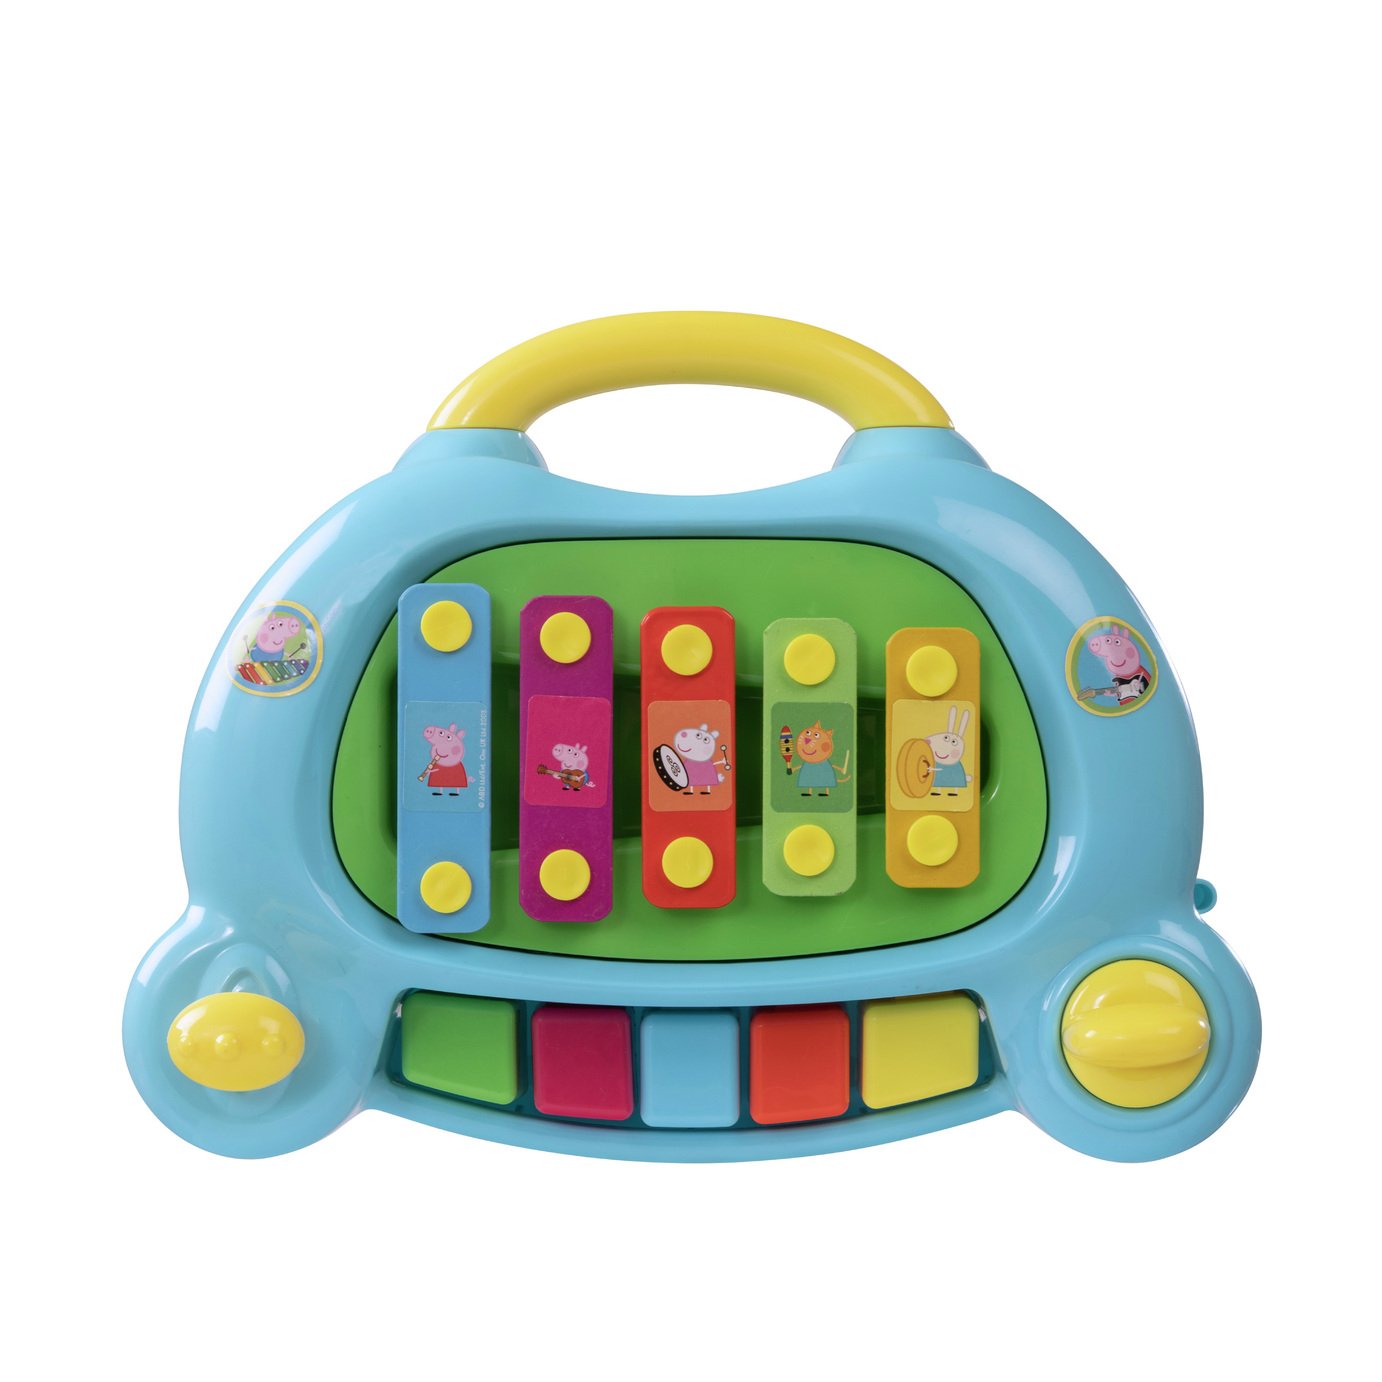 Peppa Pig Peppa's Piano Playset Reviews - Updated August 2023